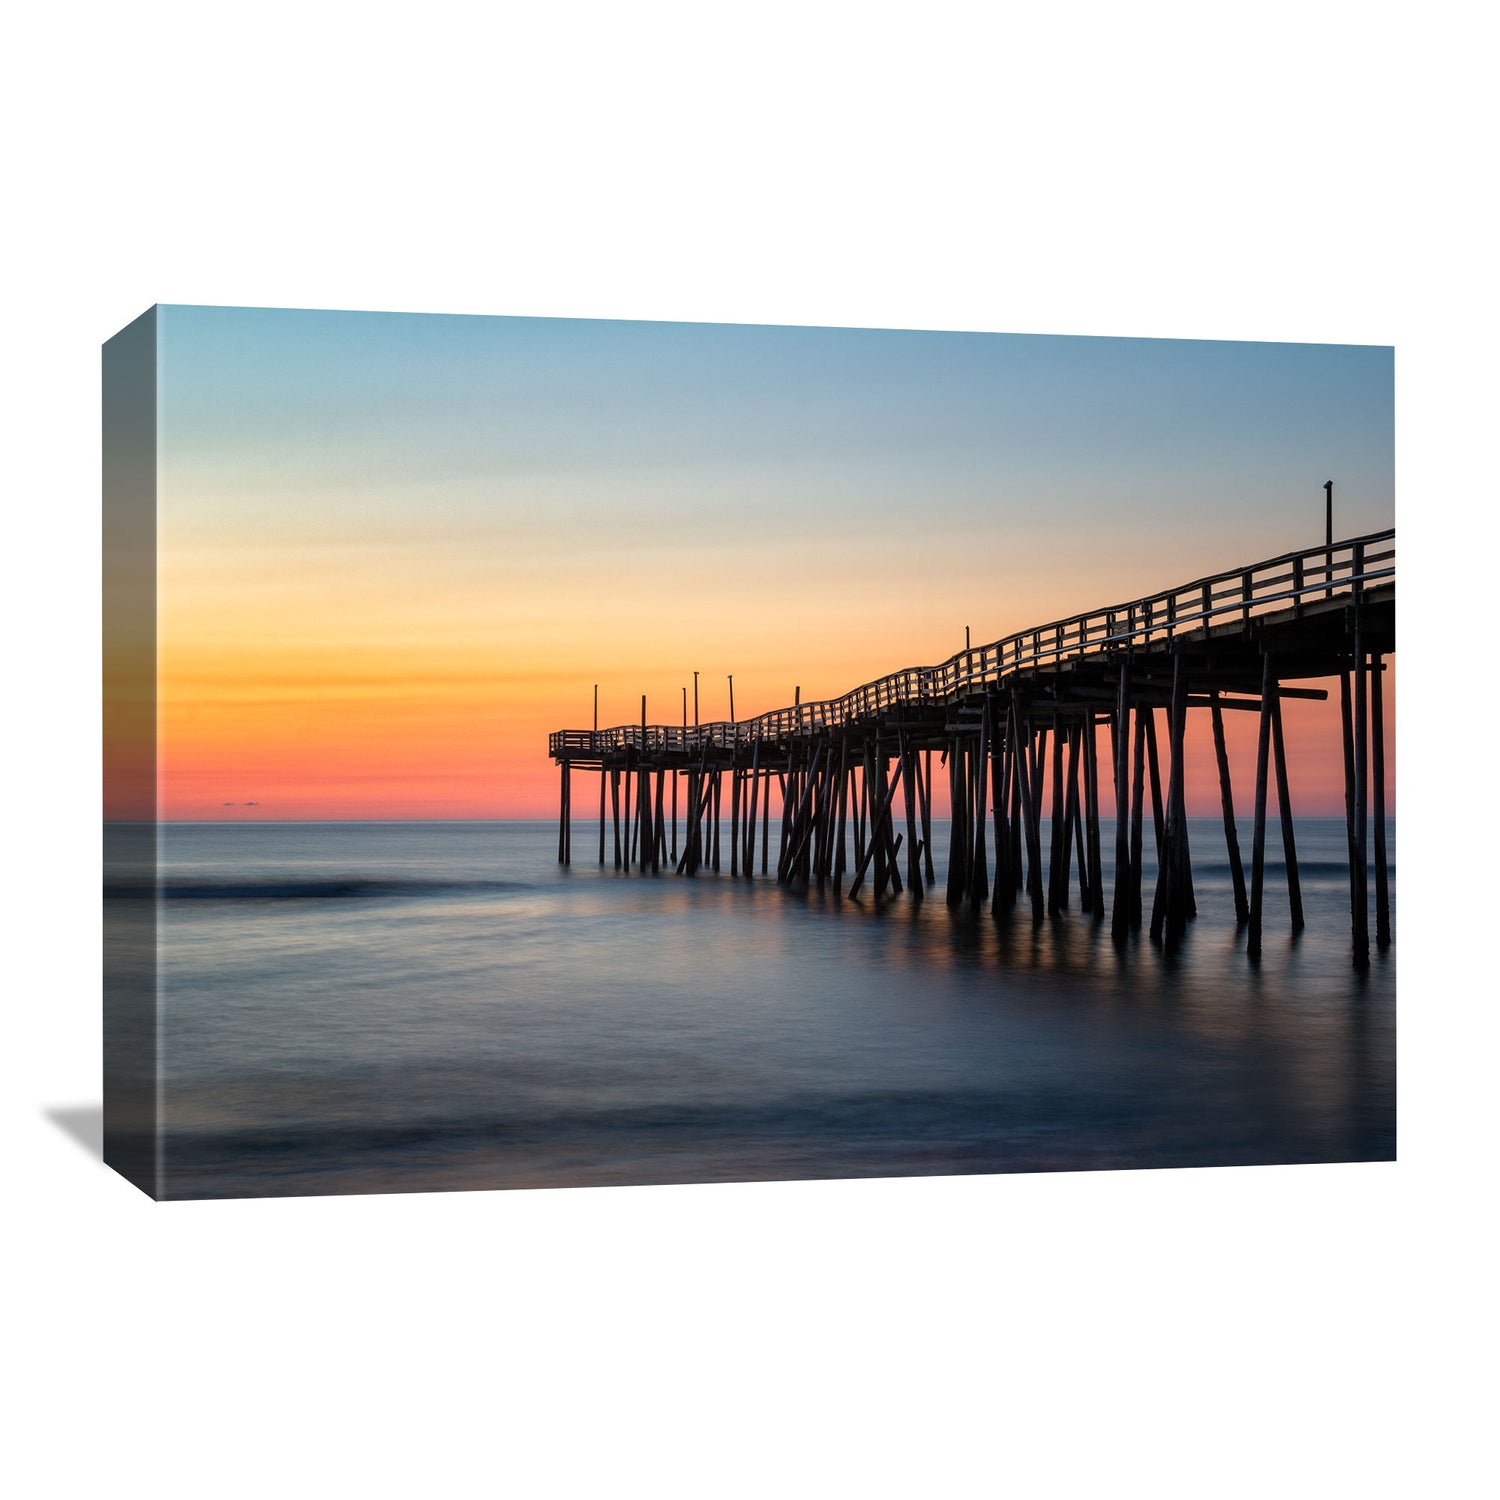 canvas wall art of avon pier in the outer banks